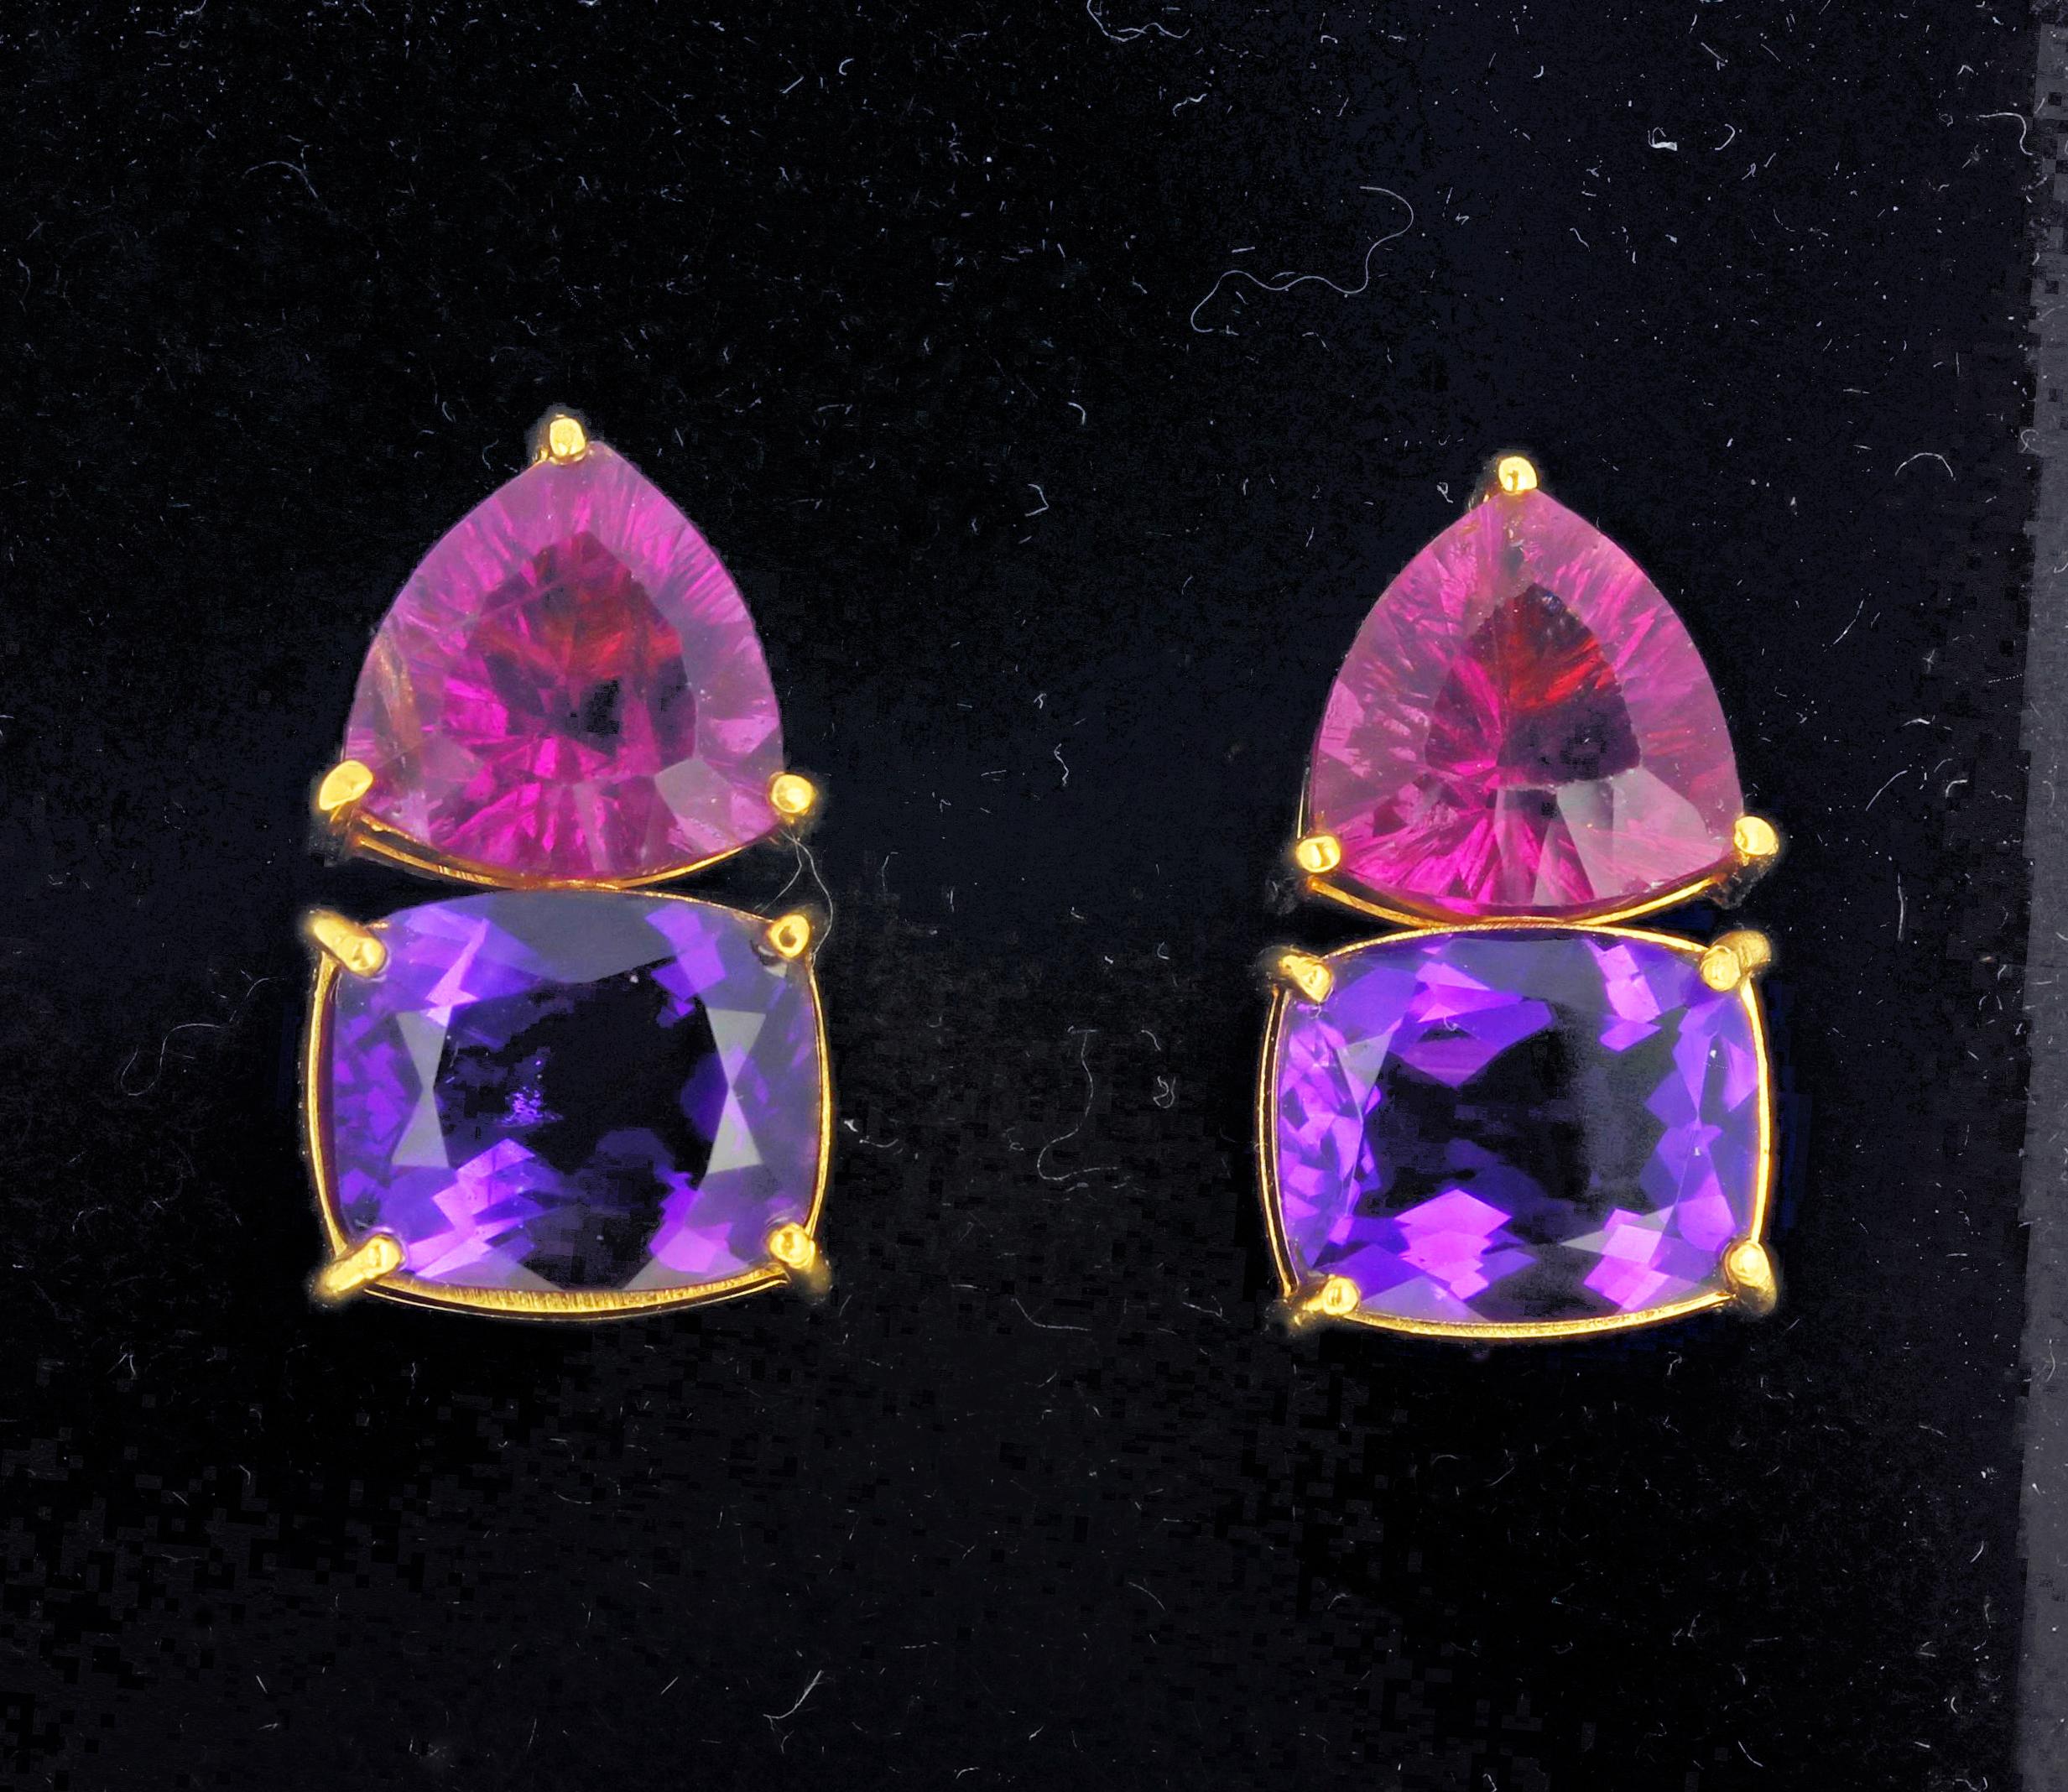 Gorgeous handmade unique dark pink Tourmalines (3.10 carats each) enhance these brilliant Amethysts (3.10 carats each) set in 18kt yellow gold stud earrings. They hang approximately 20 mm. from top of Tourmaline to bottom of Amethyst.  More from